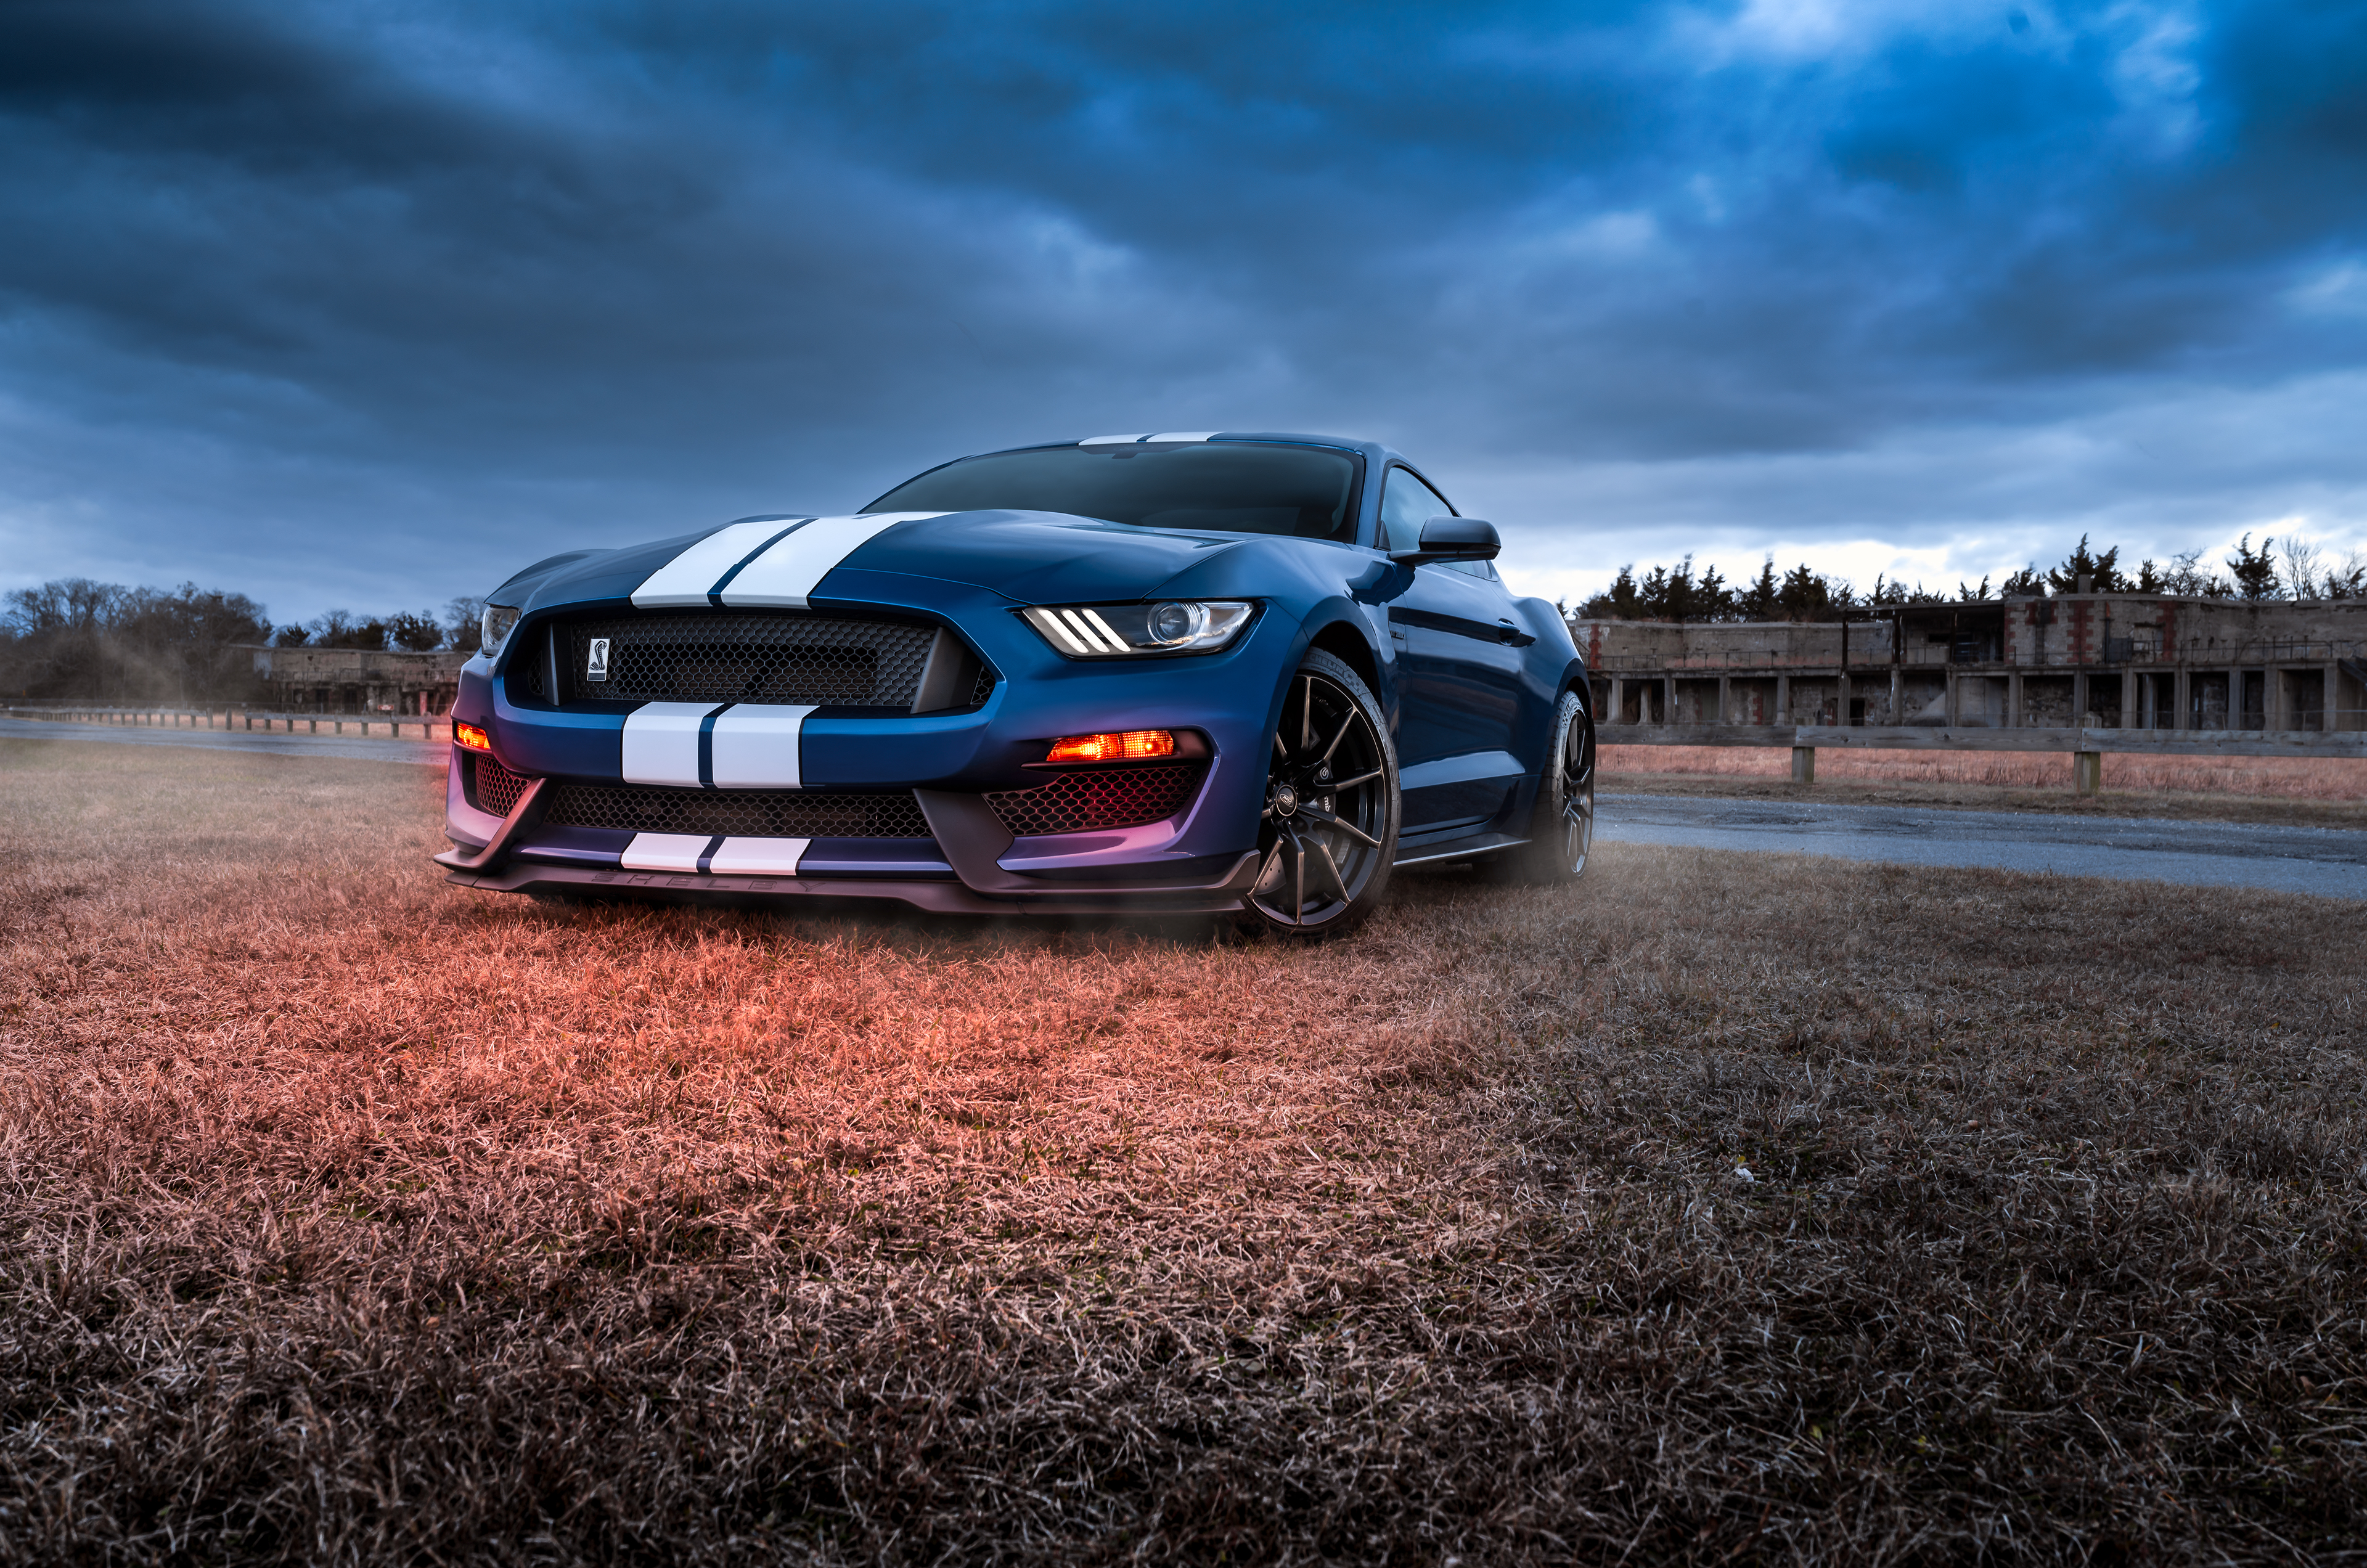 Ford Mustang Shelby GT500 Wallpaper 4K, Muscle cars, Cars